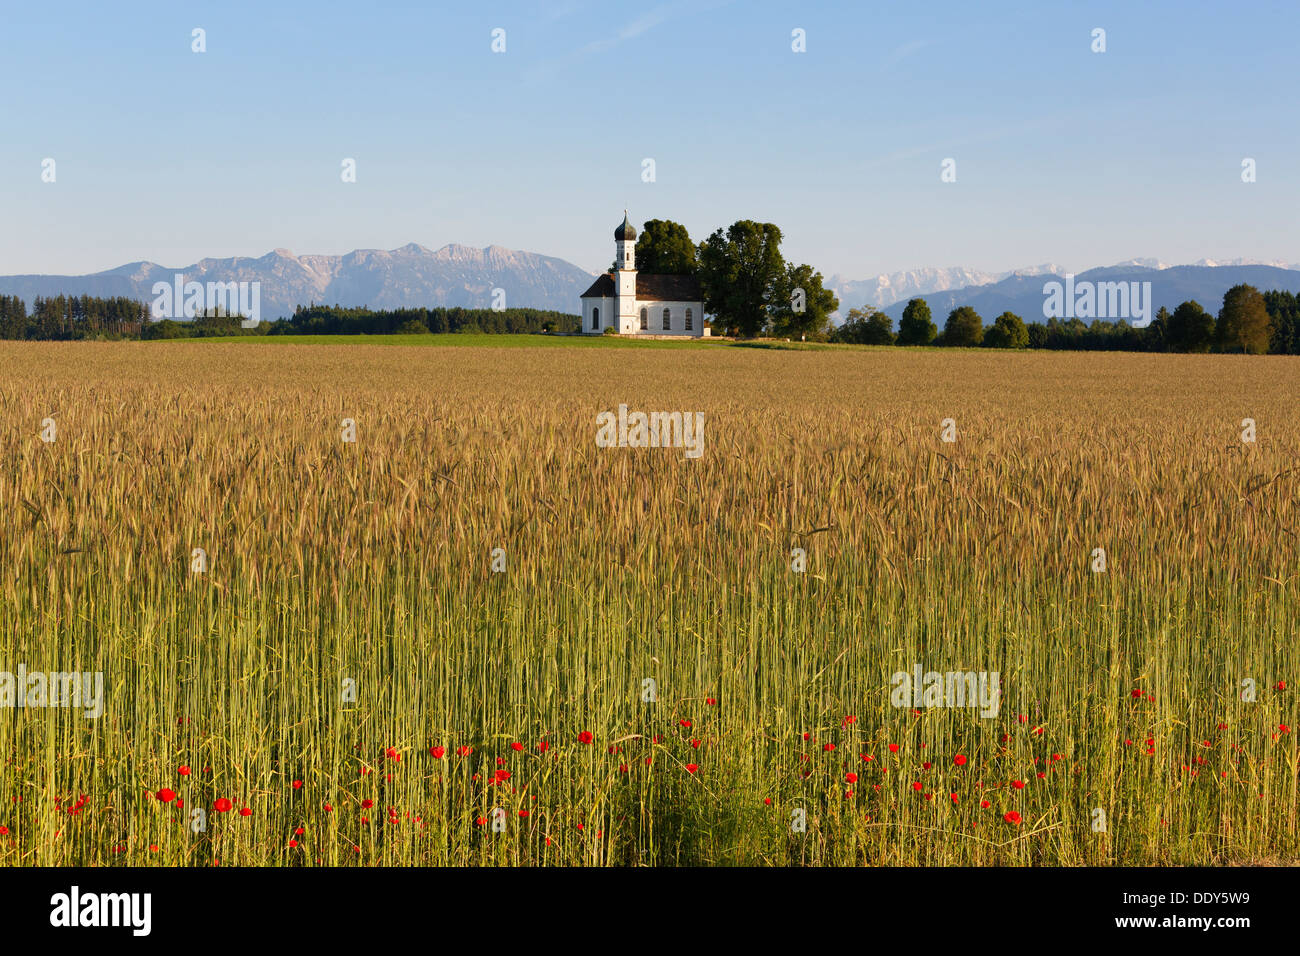 Field of grain and poppies in front of the Church of St. Andrä and the Alps, Etting, Polling, Pfaffenwinkel region Stock Photo